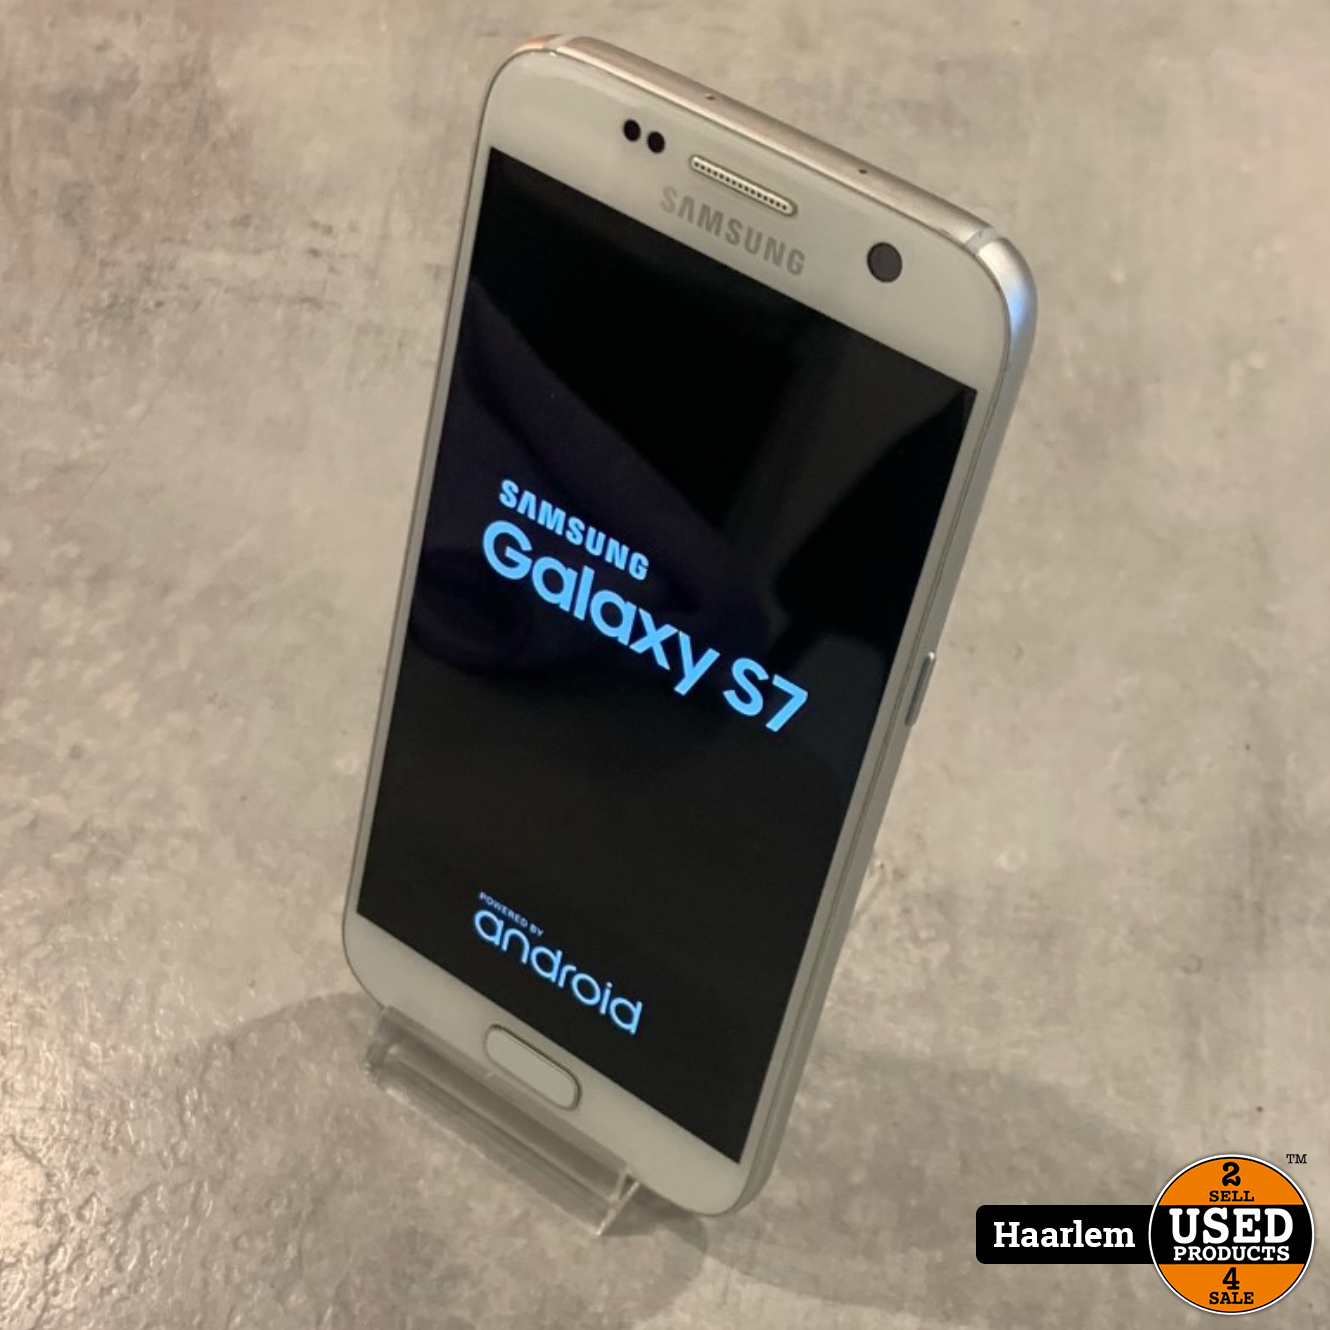 spontaan Trouwens straf Samsung Galaxy S7 32Gb White in prima staat - Used Products Haarlem  Cronjéstraat